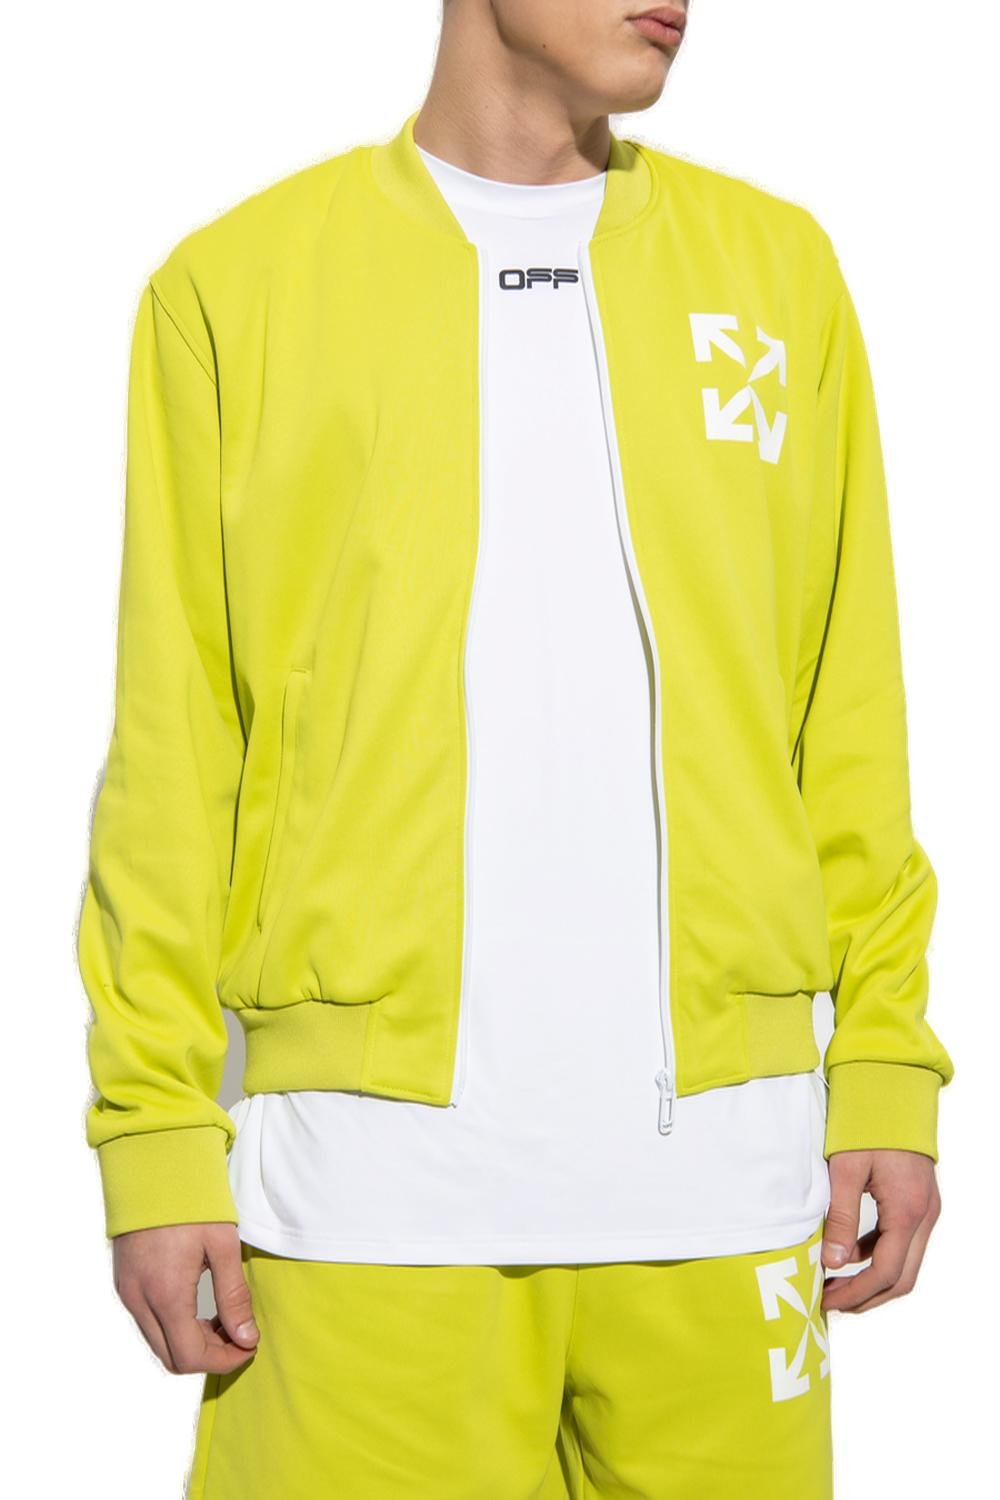 Off-White Arrows Printed Zip-Up Track Jacket